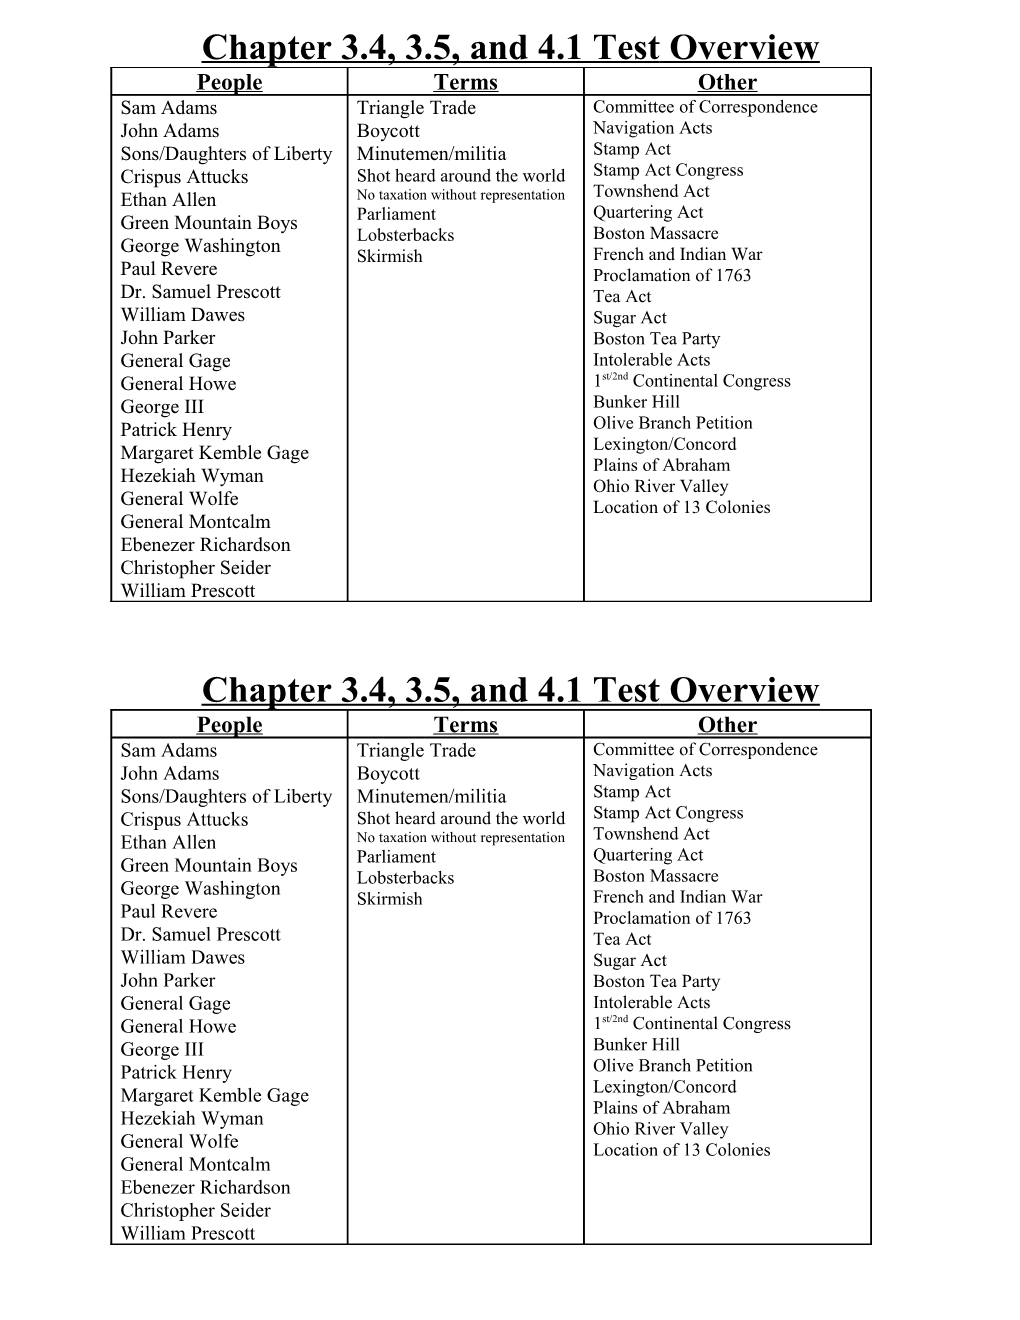 Chapter 11 Test Overview